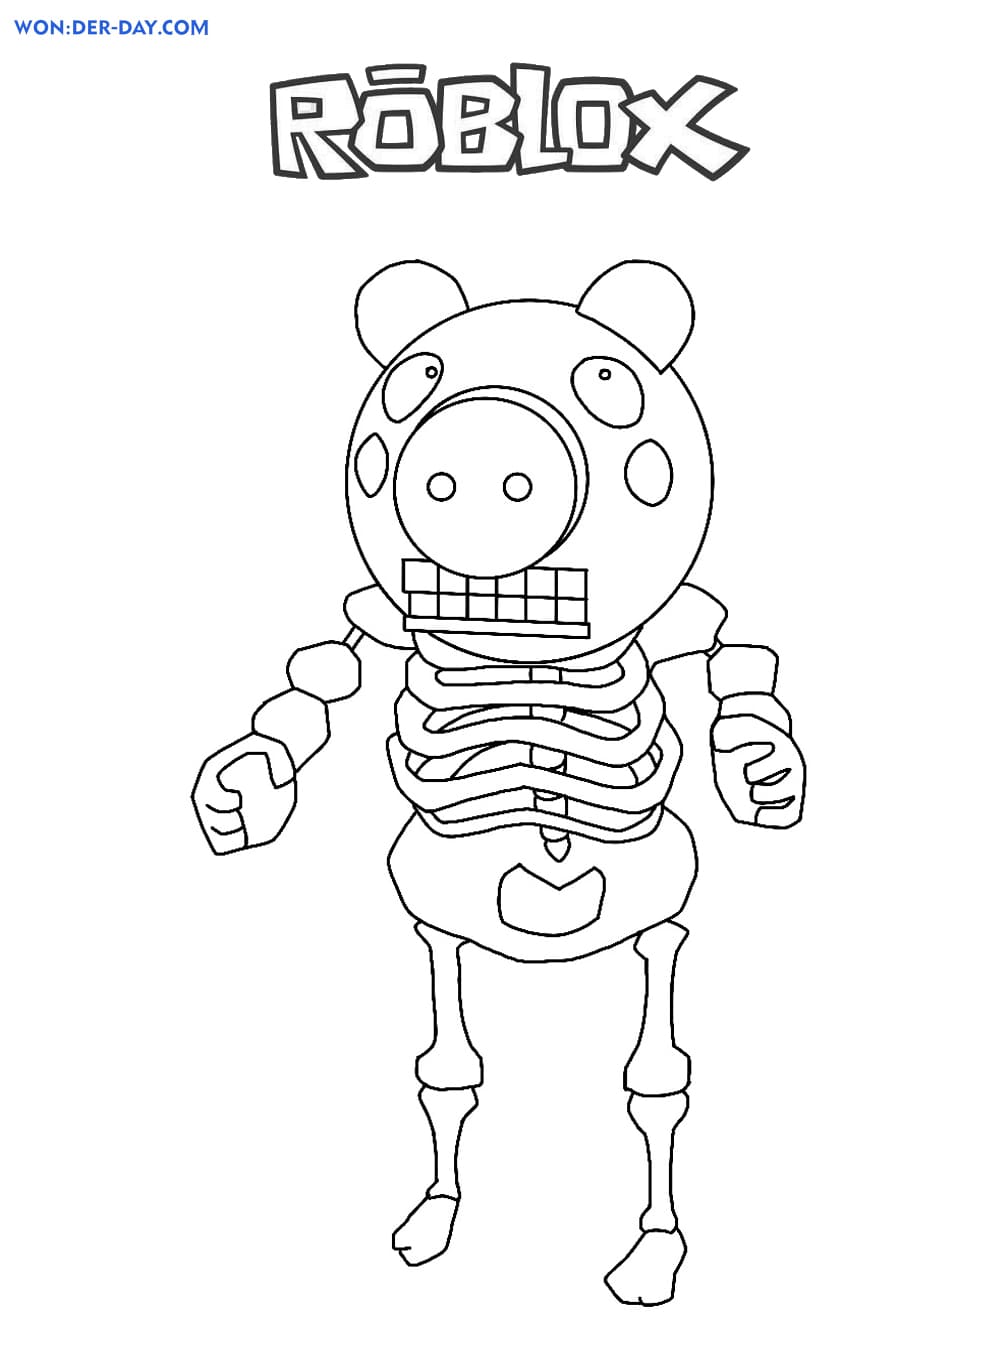 Piggy Roblox Coloring Pages Wonder Day Coloring Pages For Children And Adults - foxy roblox coloring pages